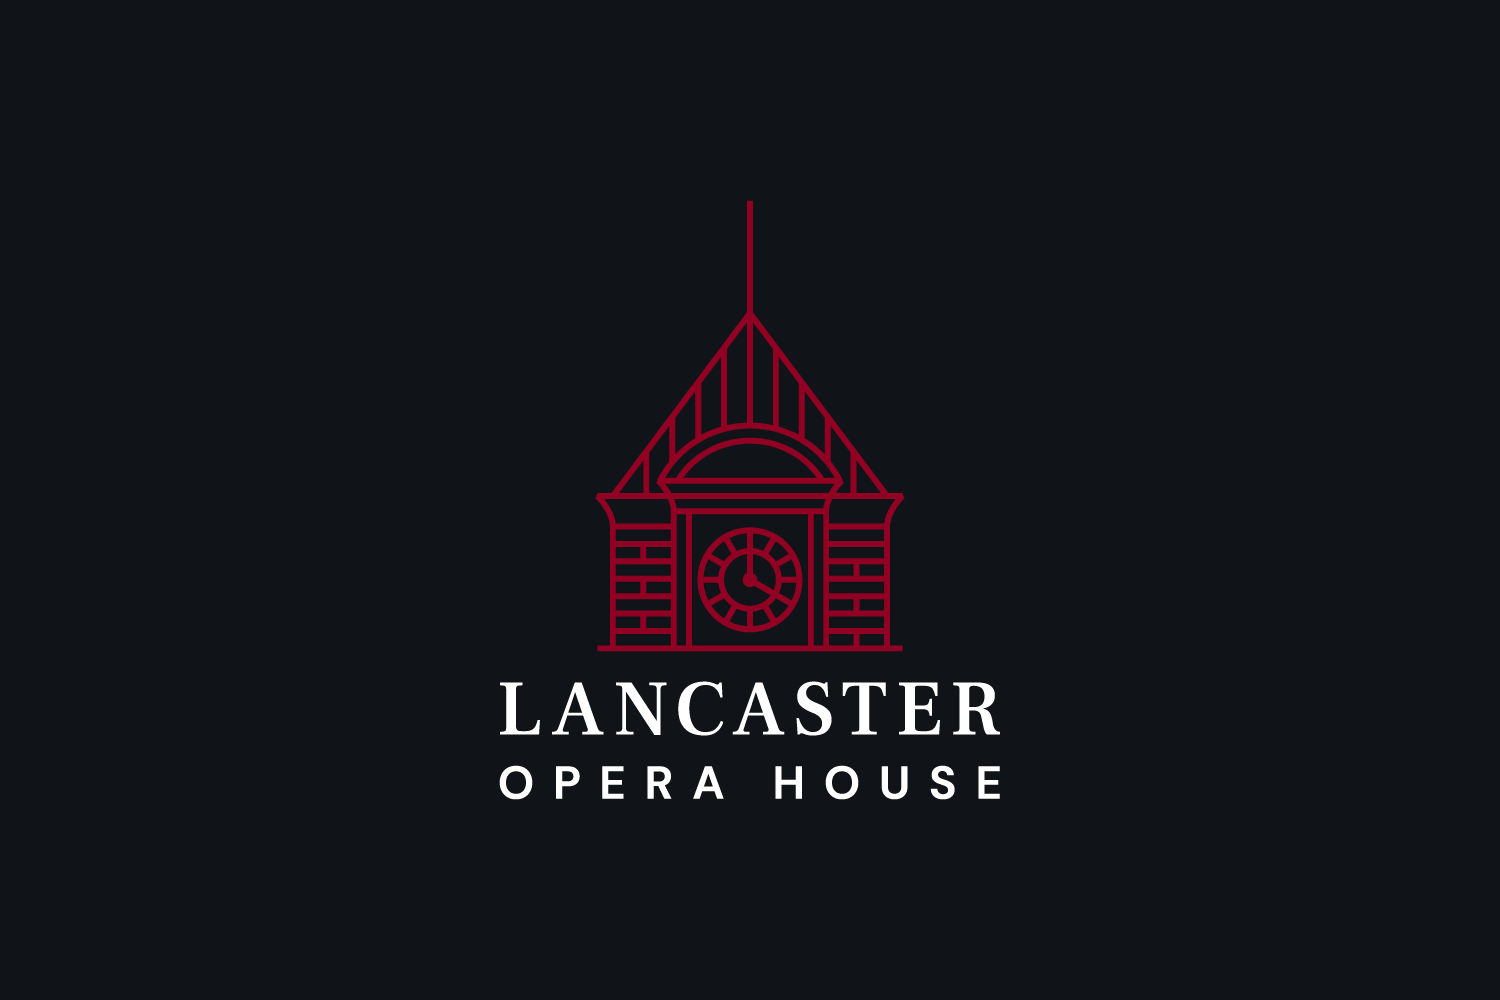 Welcome to our new website - Lancaster Opera House